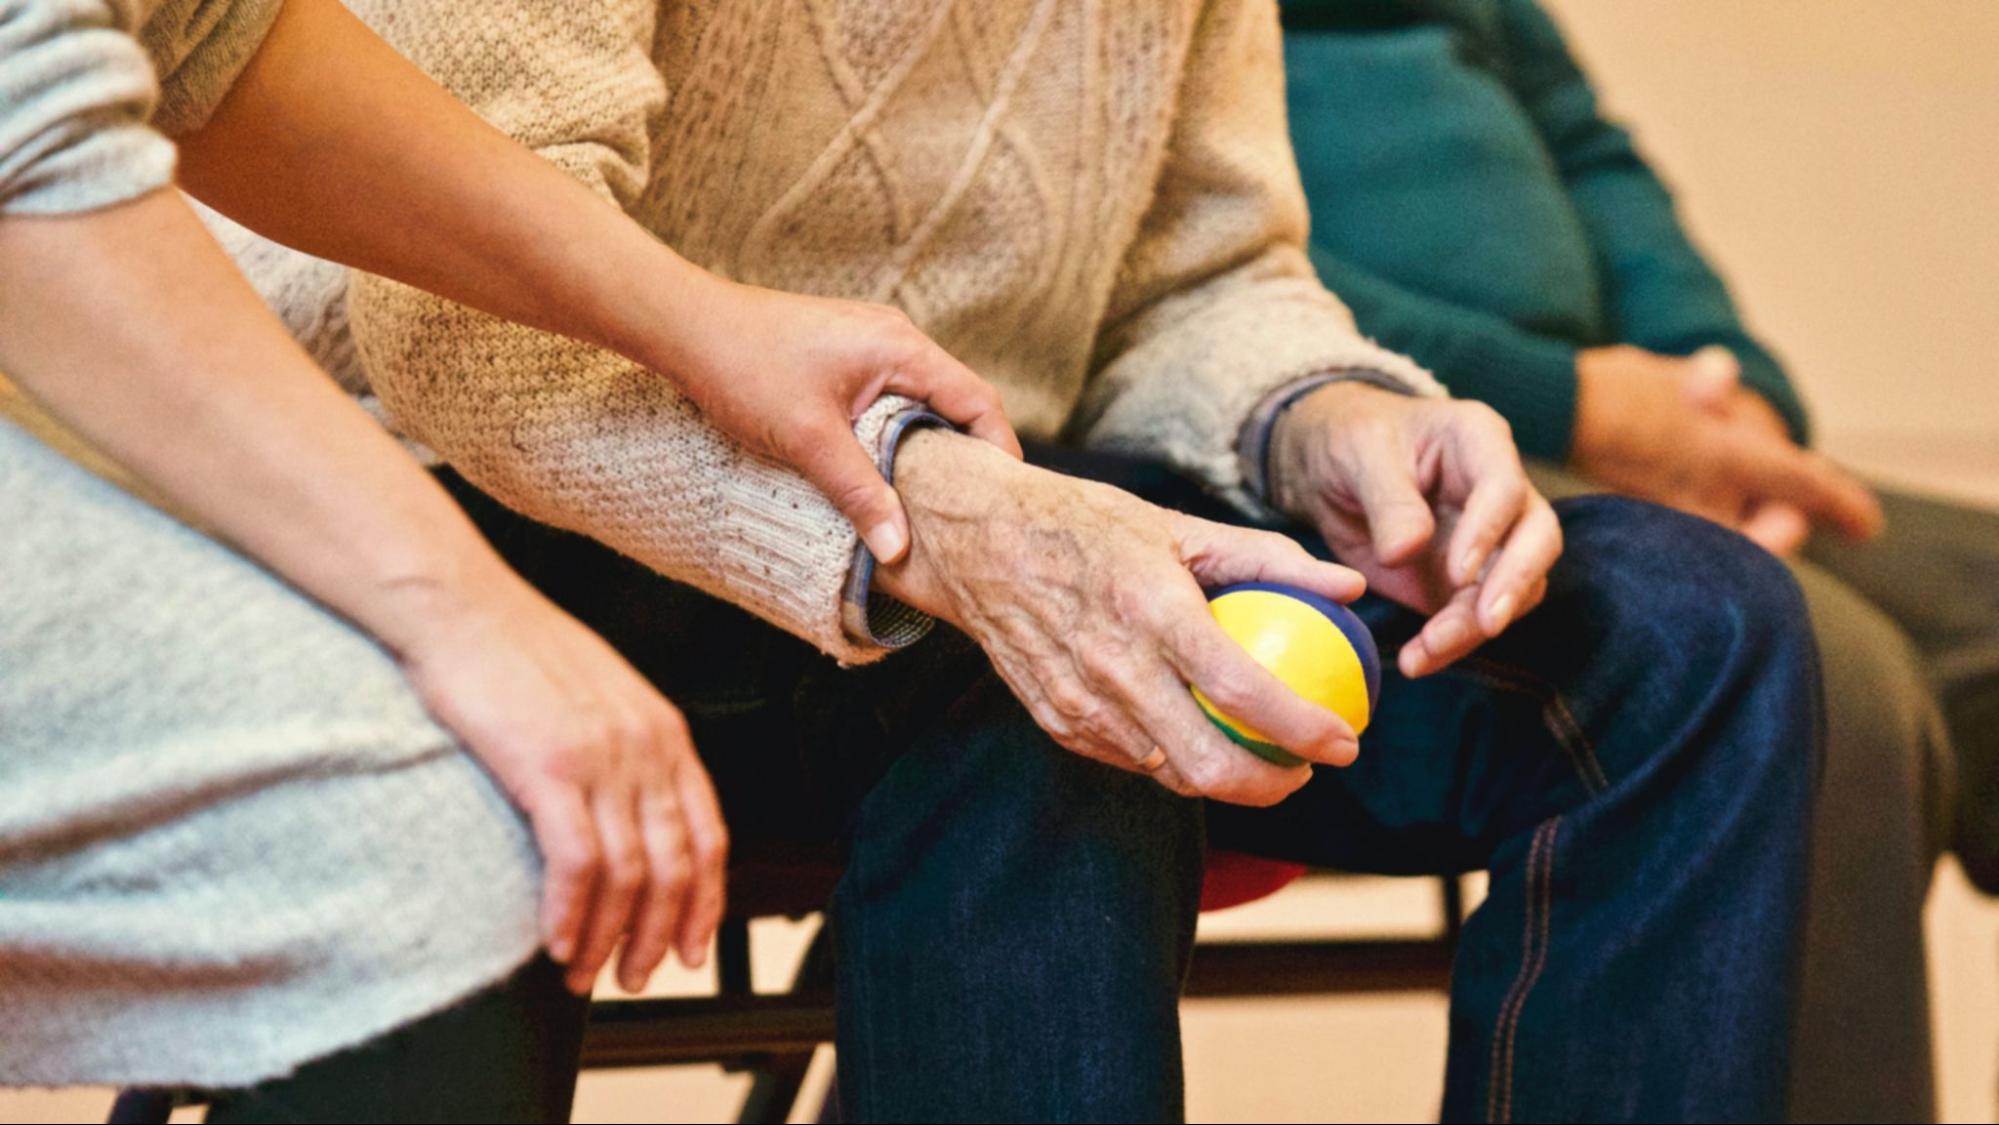 This is an image of an elderly person holding a stress ball.